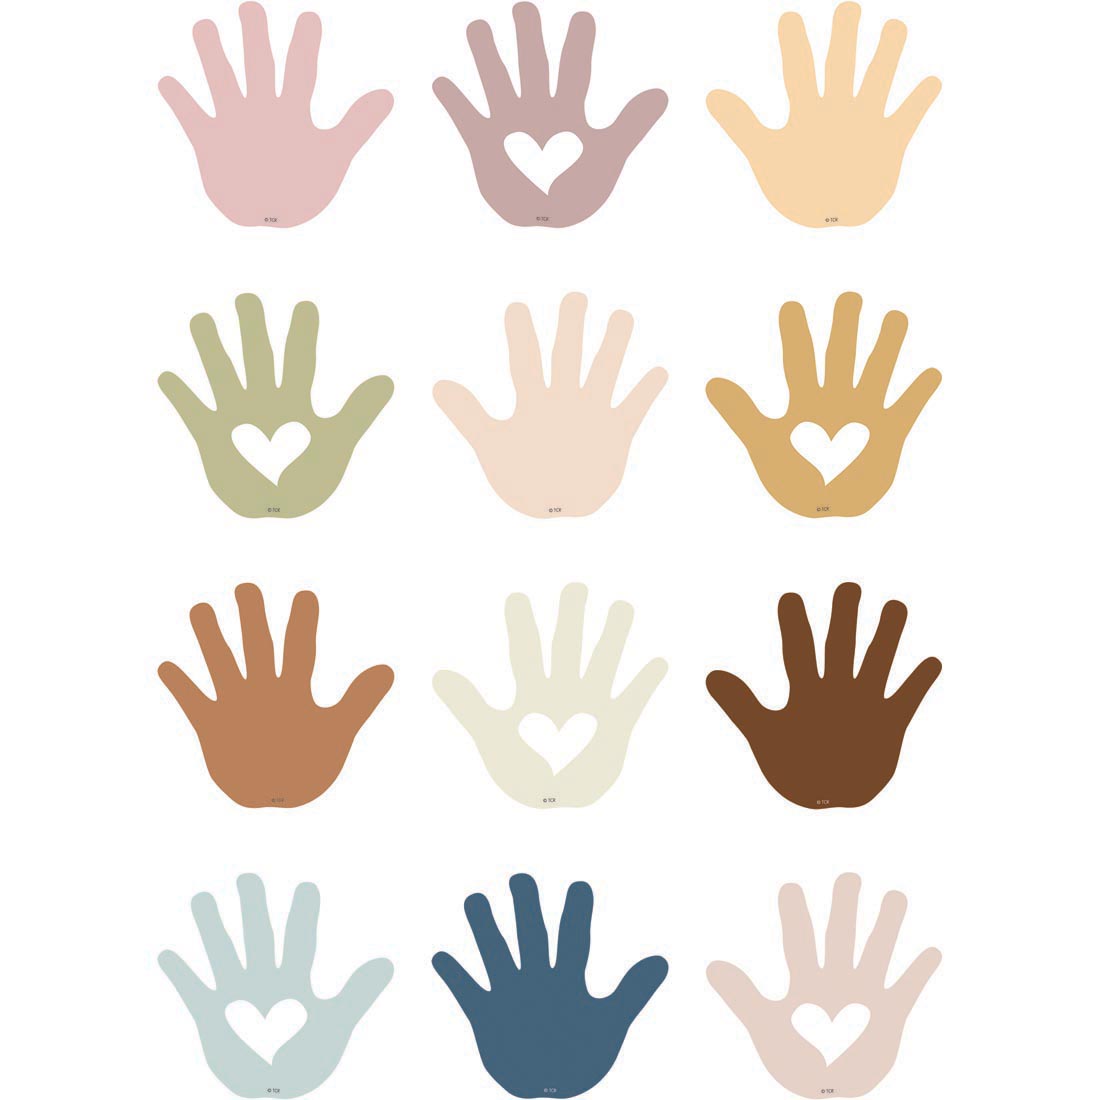 Helping Hands Mini Accents from the Everyone is Welcome collection by Teacher Created Resources